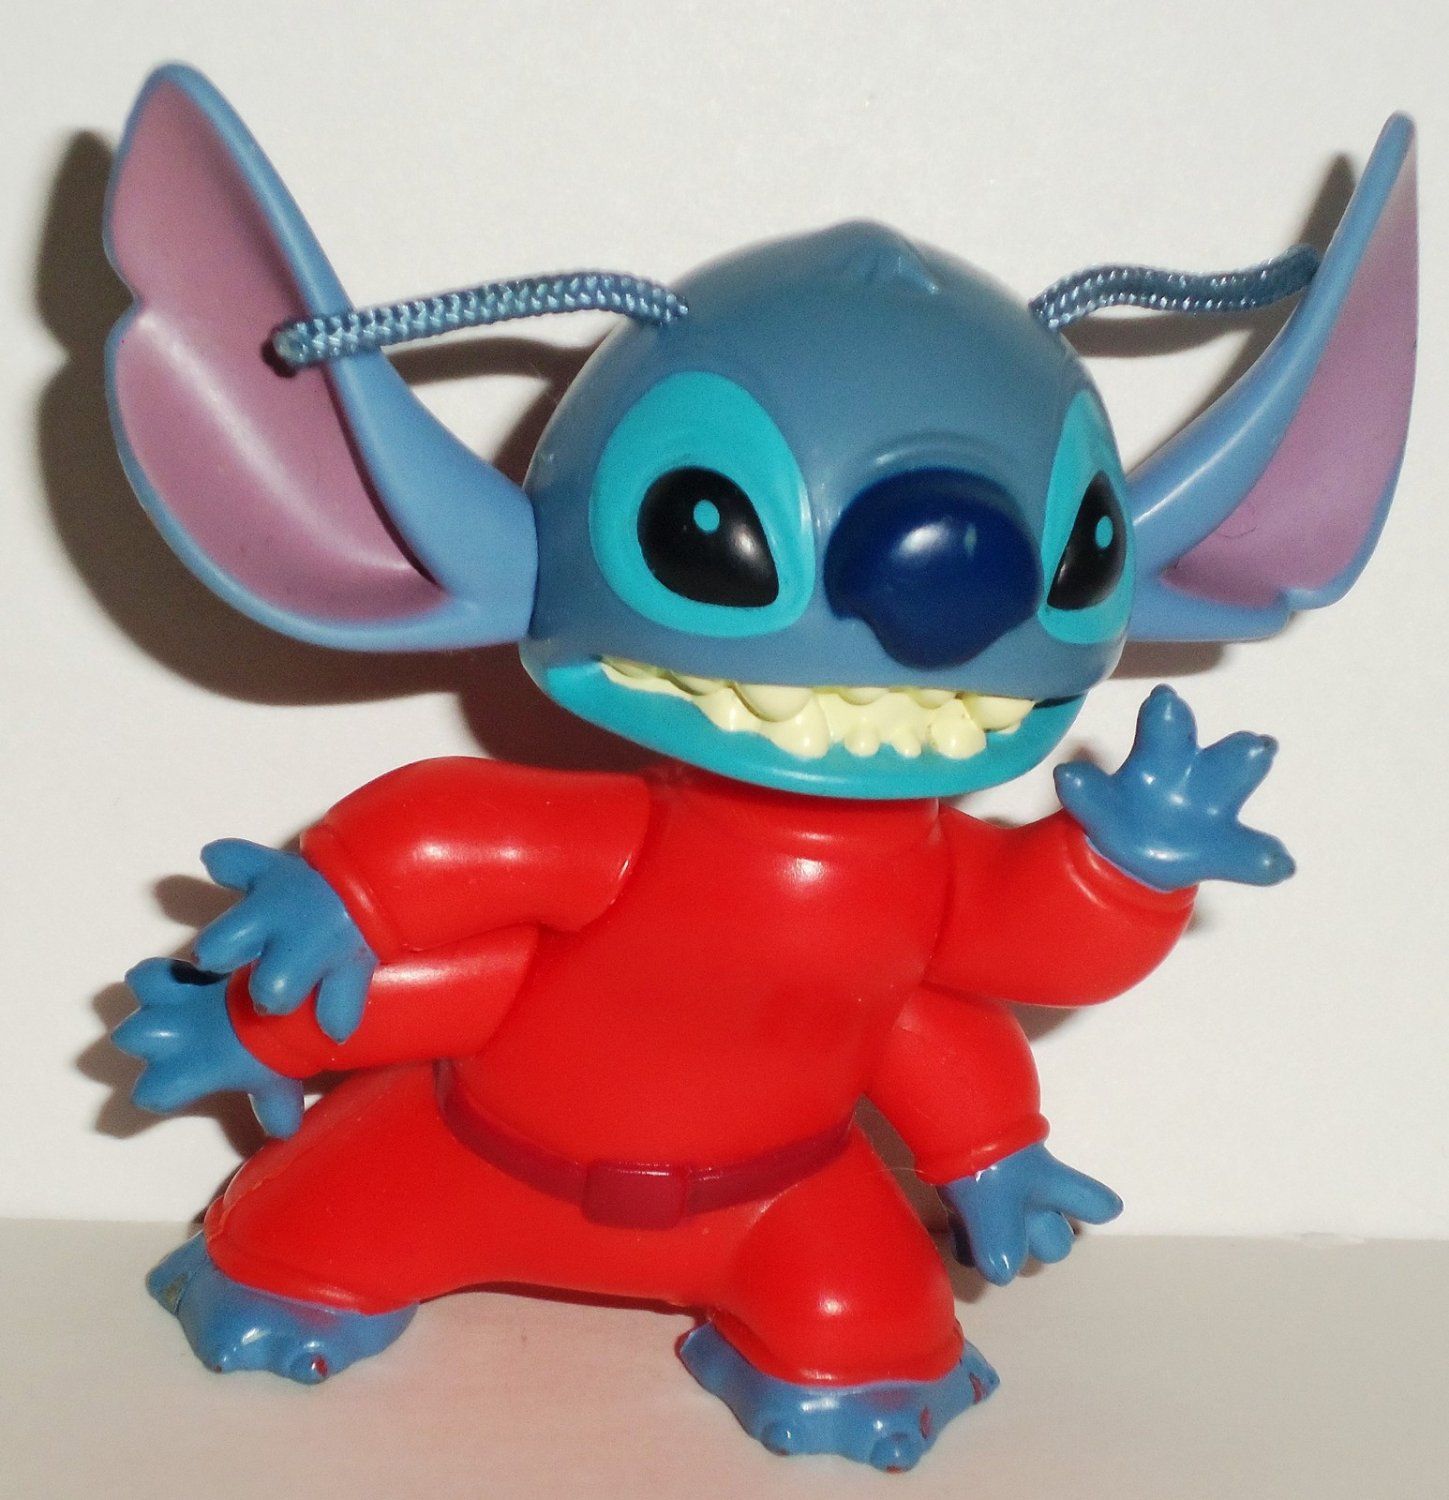 Details about   2001-2002 McDonalds Happy Meal Toy Lilo and Stitch #2 Alien Stitch 